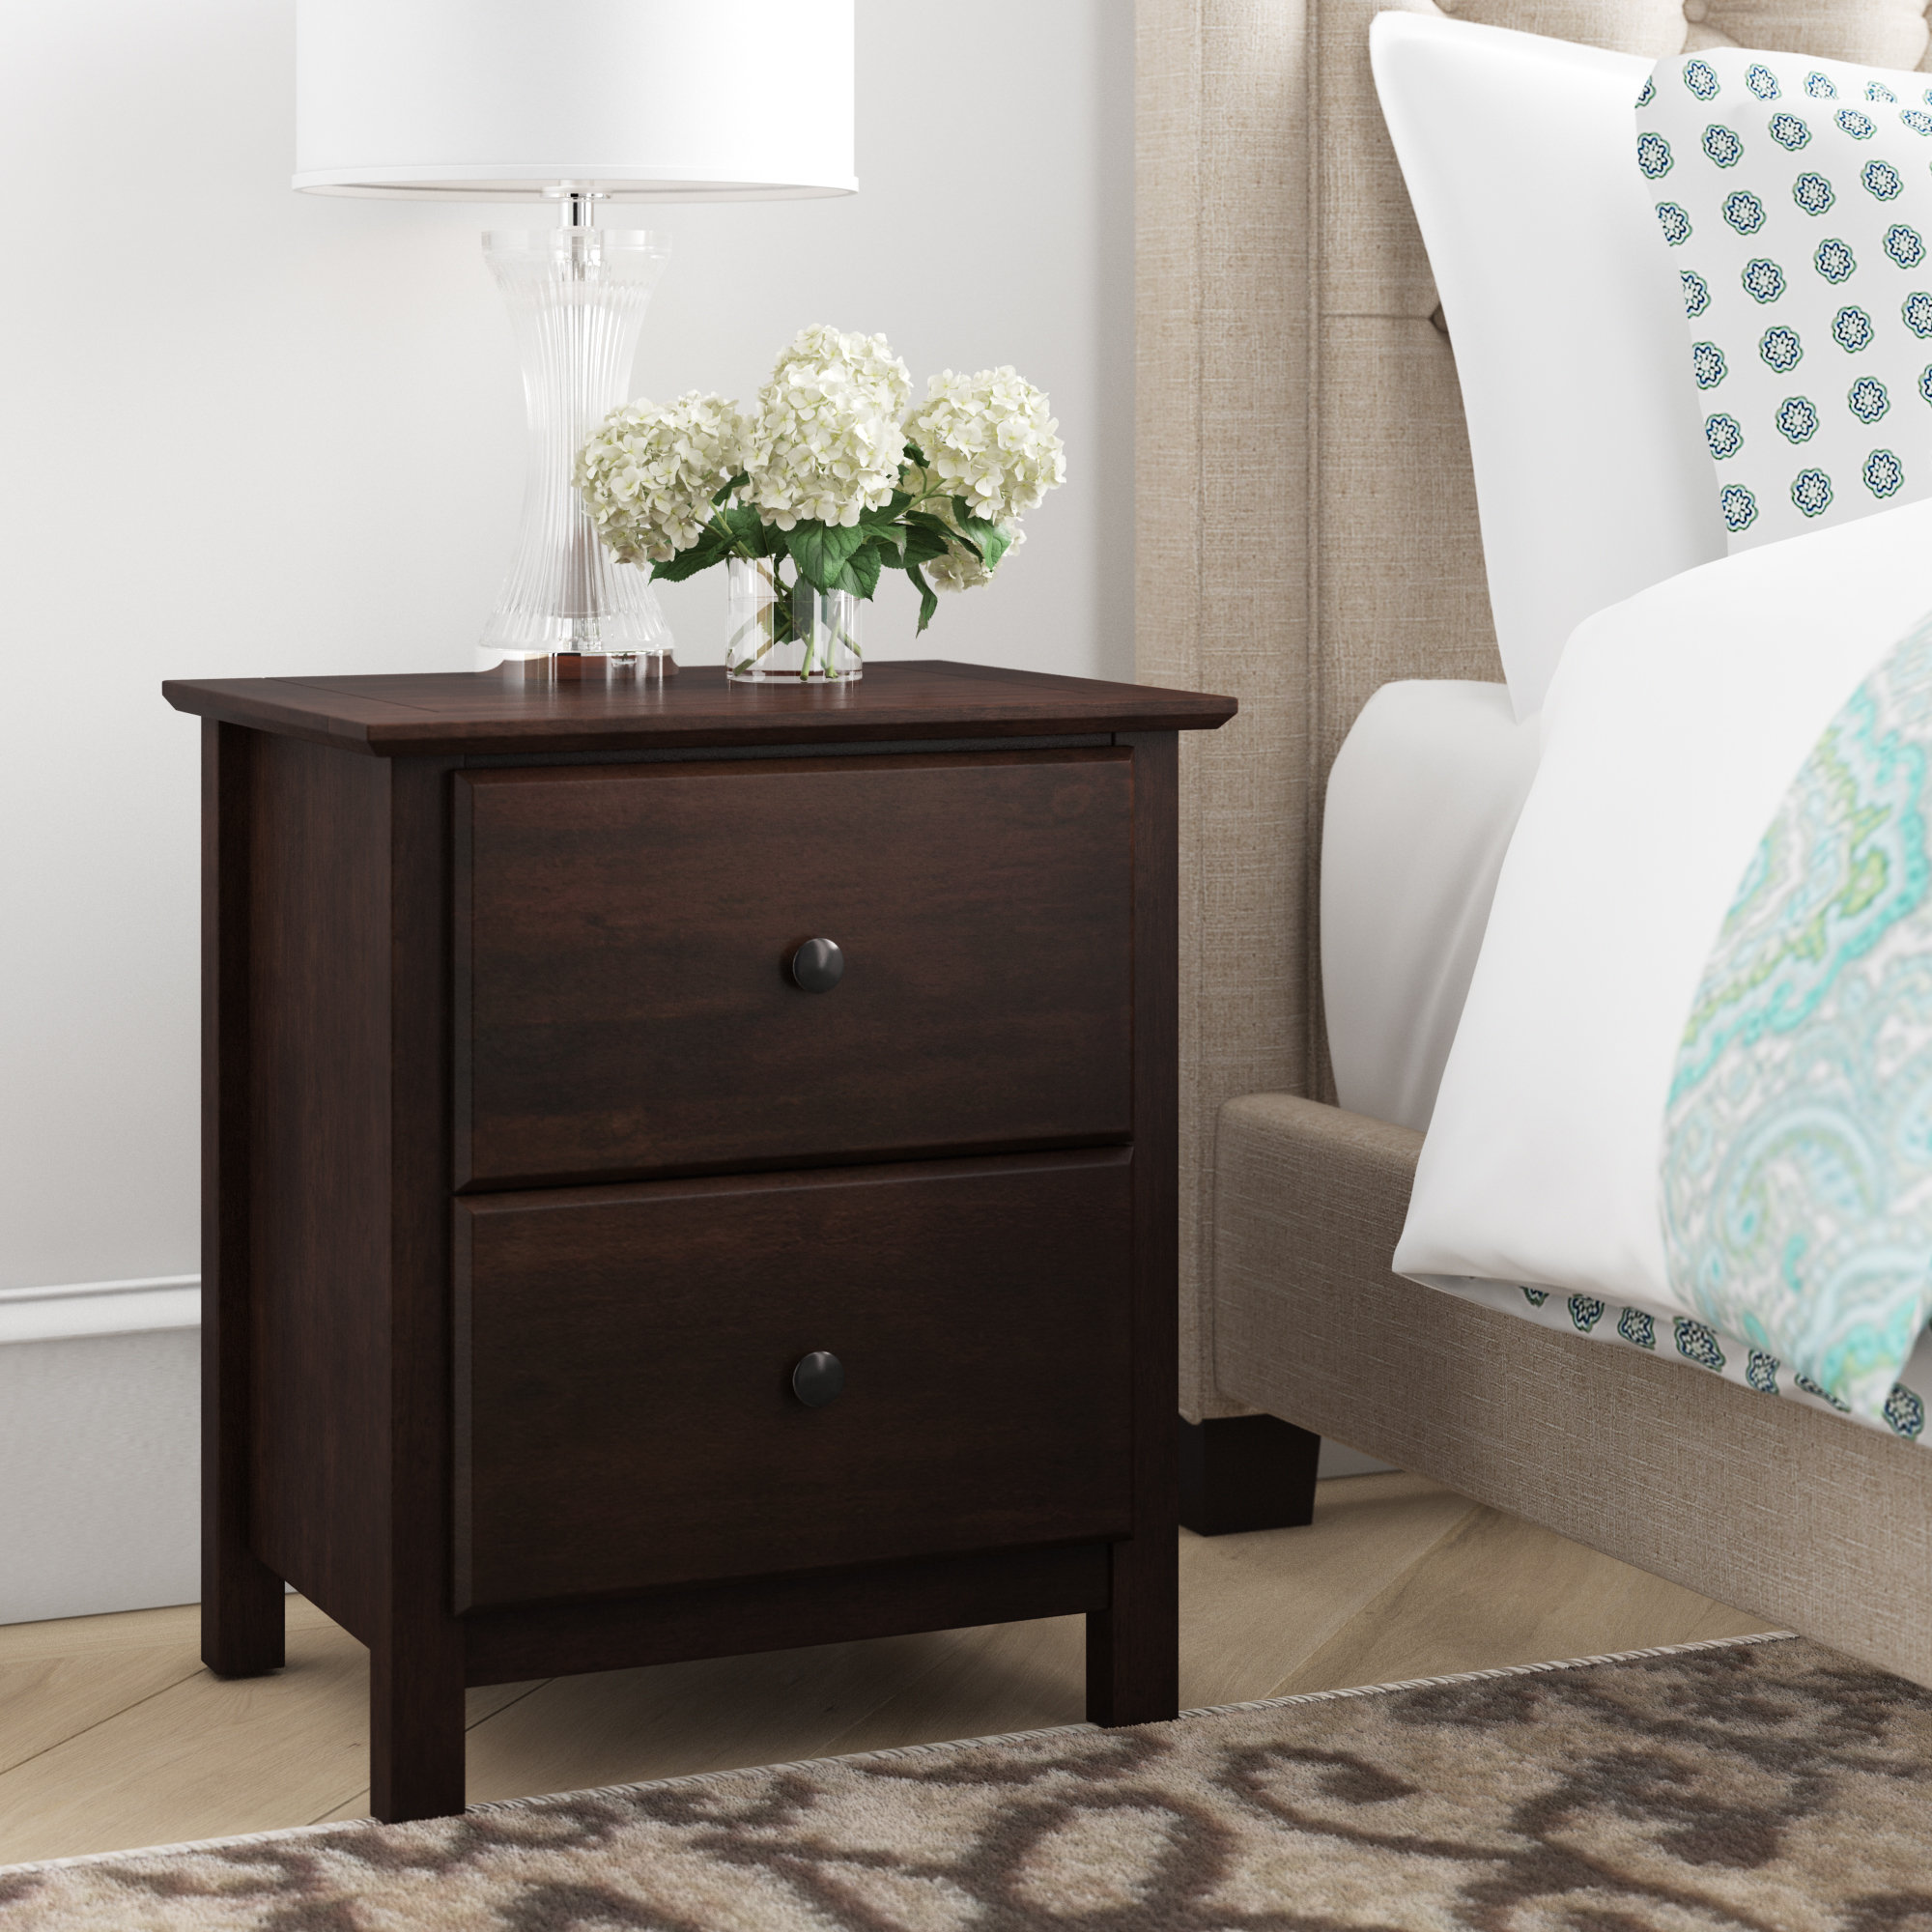 Espresso Brown 3-Drawer Wooden Nightstand Square Top With Drawer Safety STops